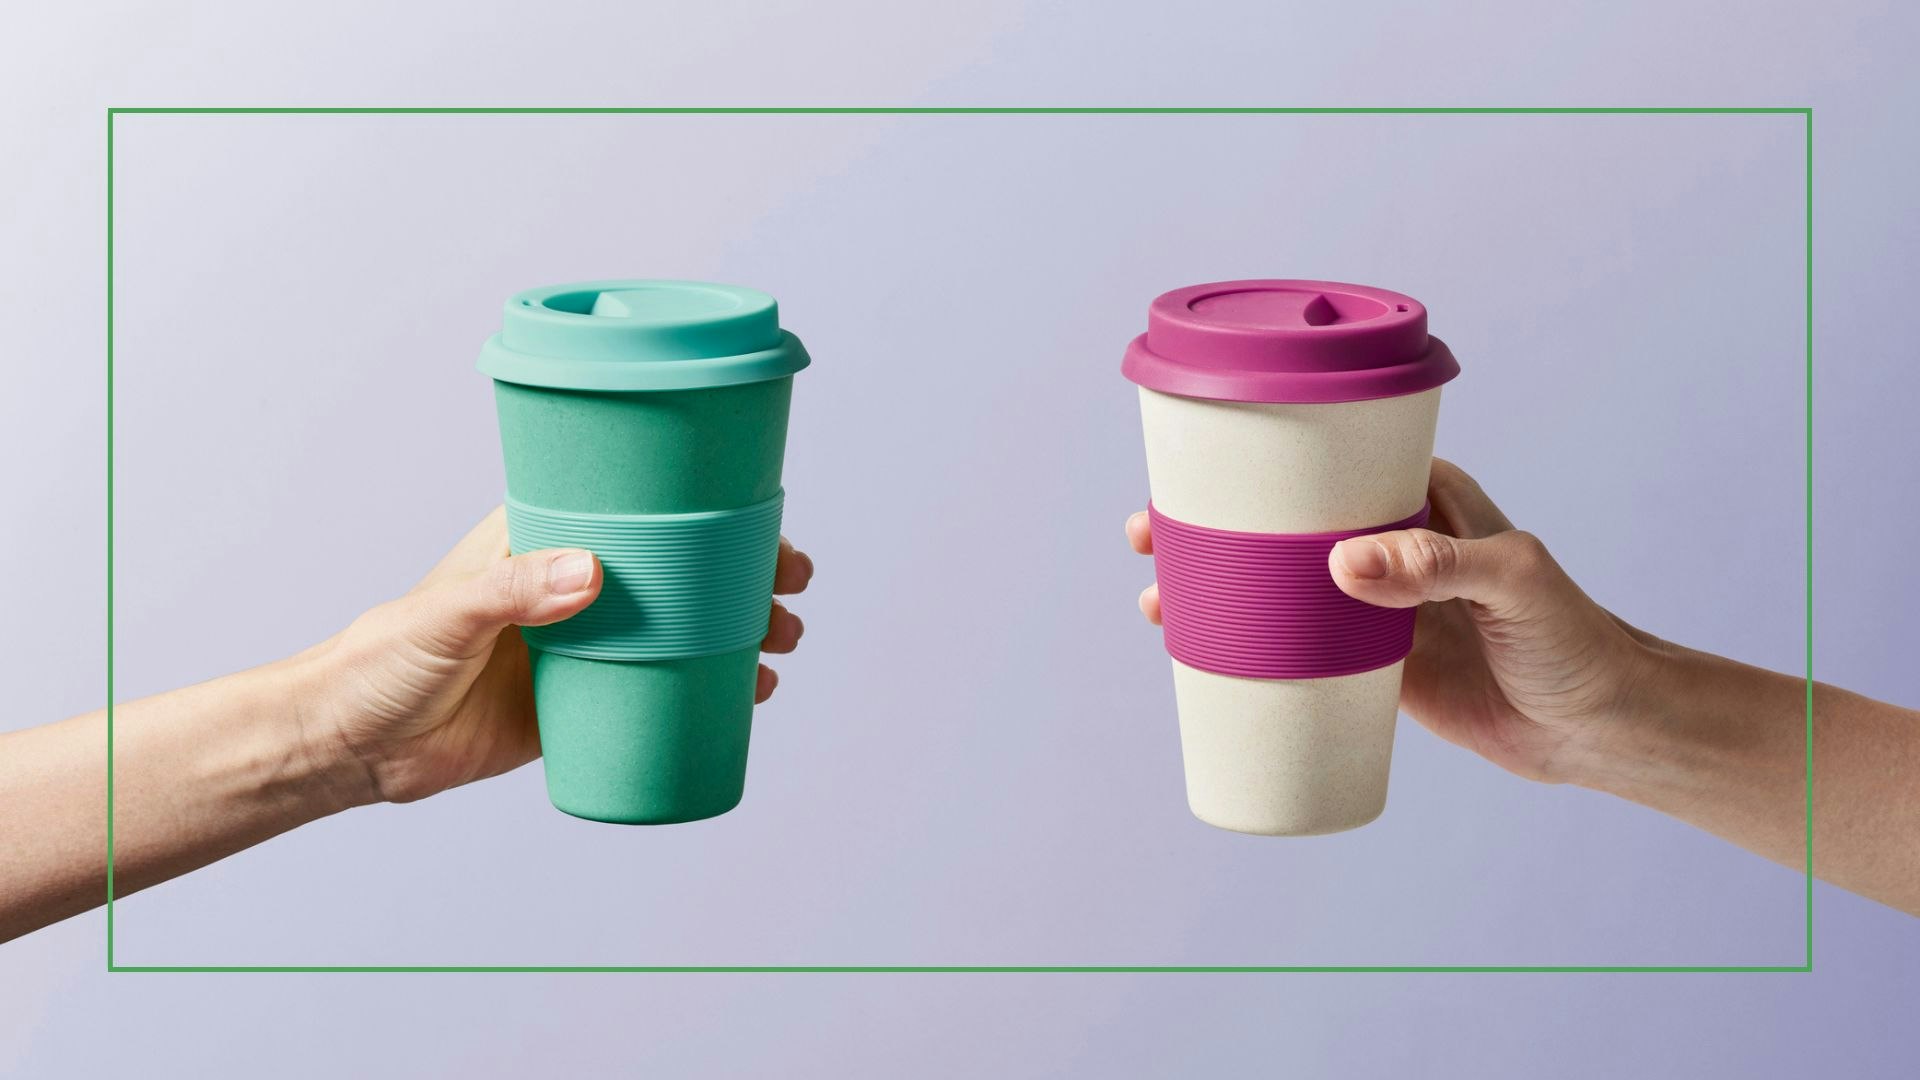 https://images.bauerhosting.com/affiliates/sites/10/2023/02/12-Of-The-Best-Reusable-Coffee-Cups.jpg?ar=16%3A9&fit=crop&crop=top&auto=format&w=undefined&q=80